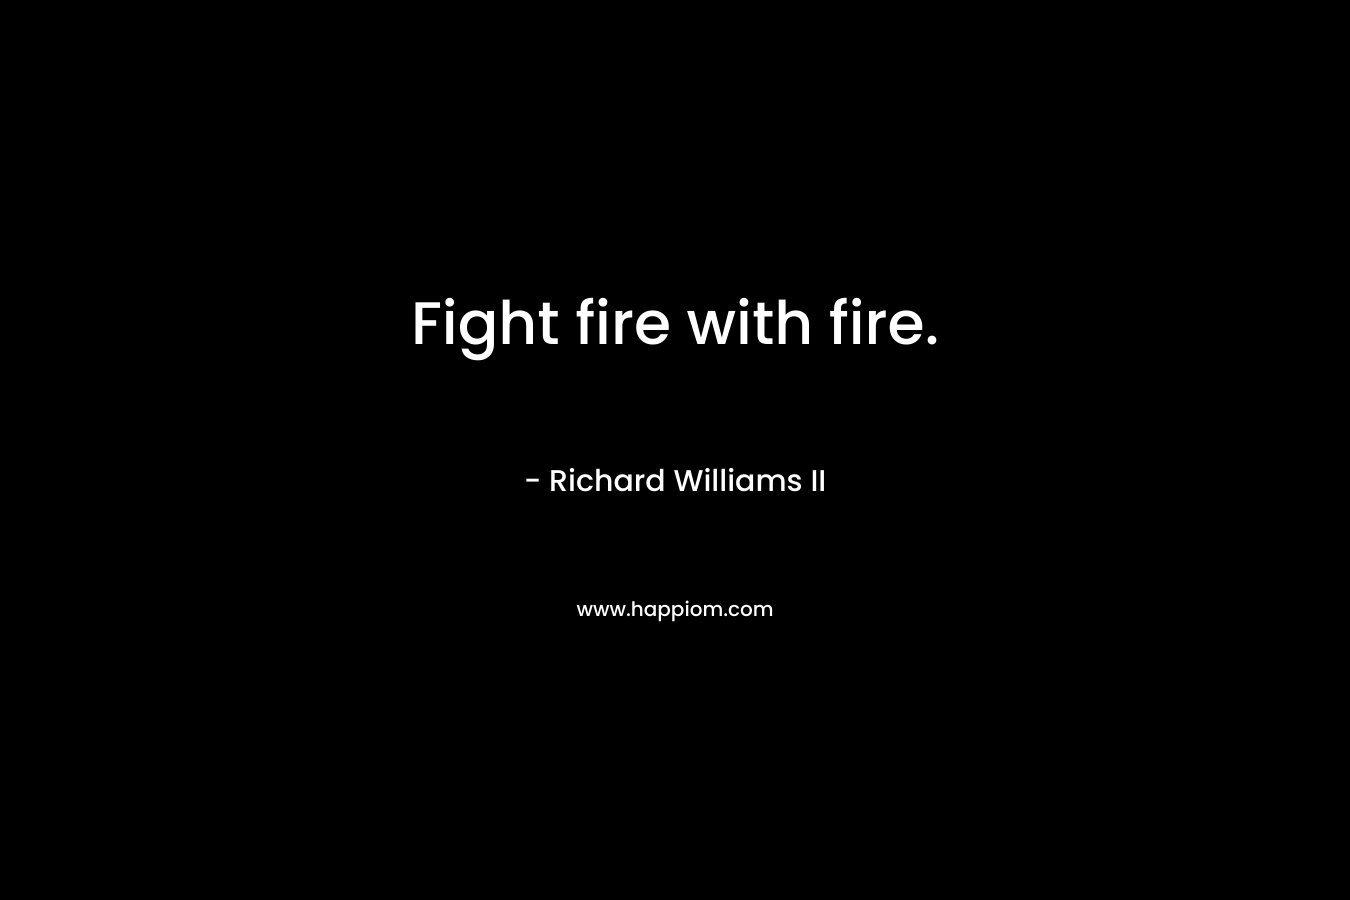 Fight fire with fire.